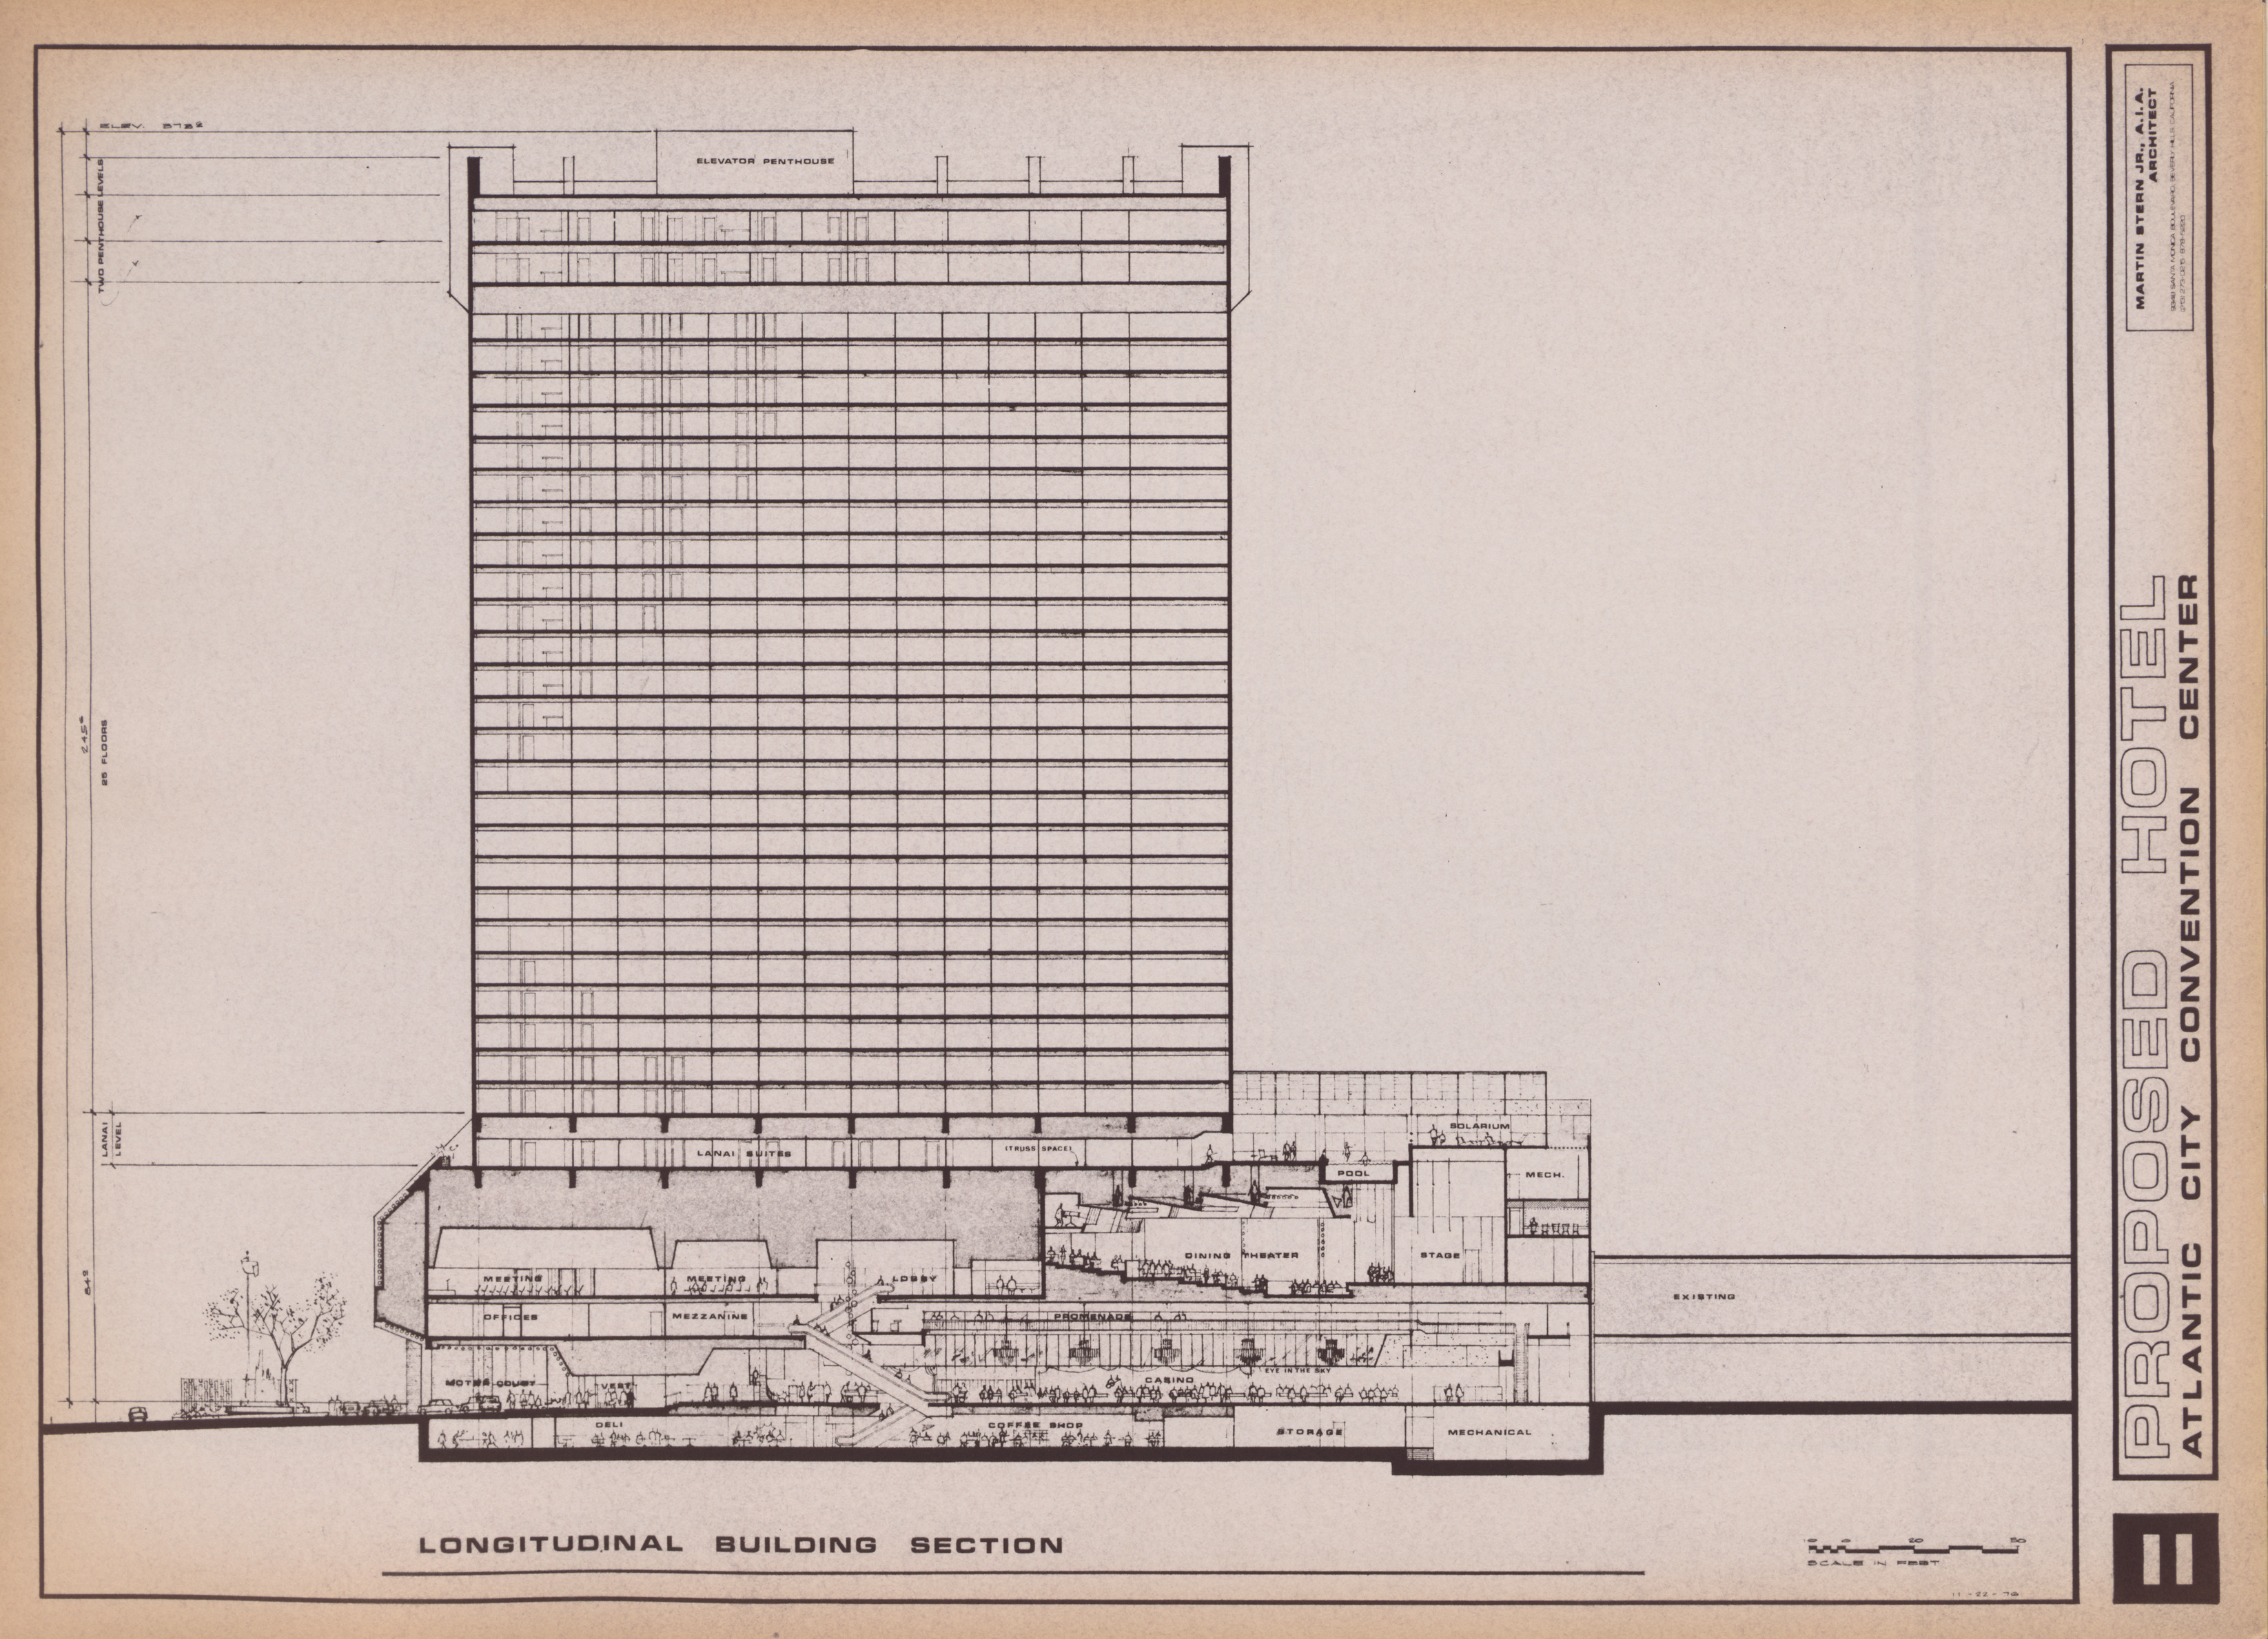 Proposed Hotel, Atlantic City Convention Center, image 11